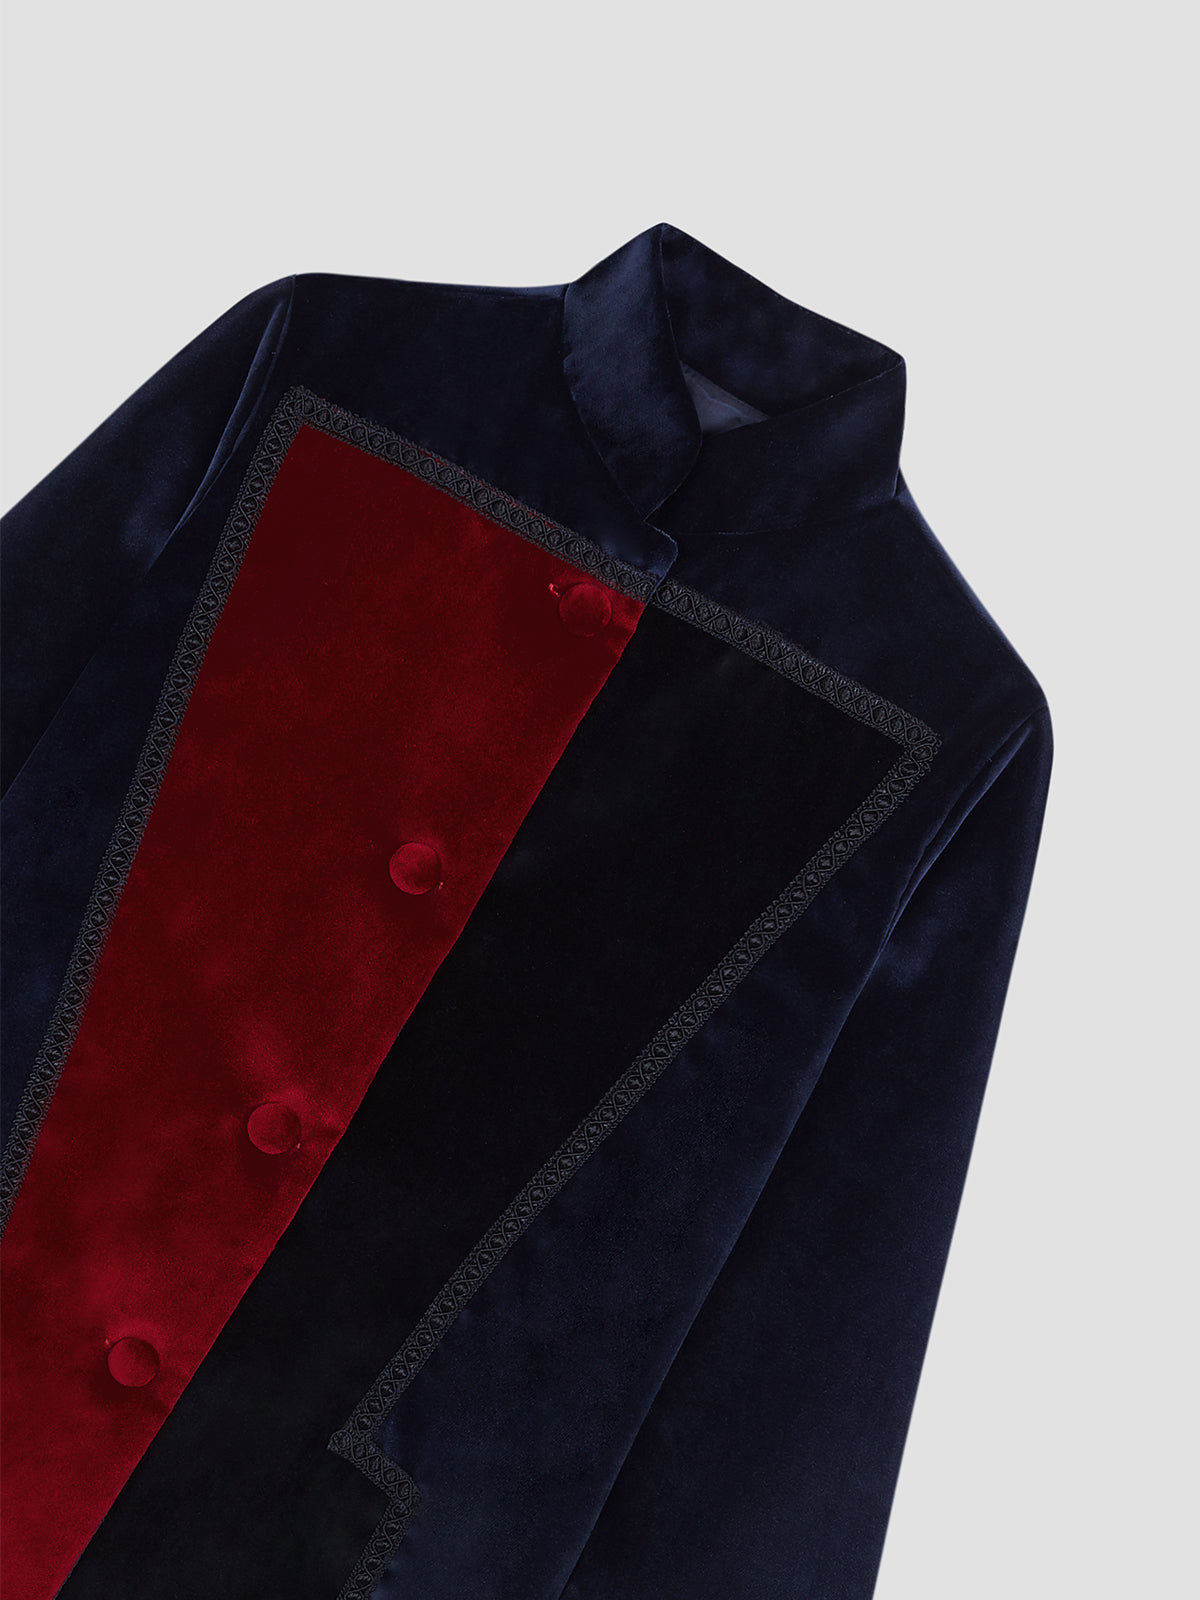 Red, navy and black velvet blazer with geometric design on the front